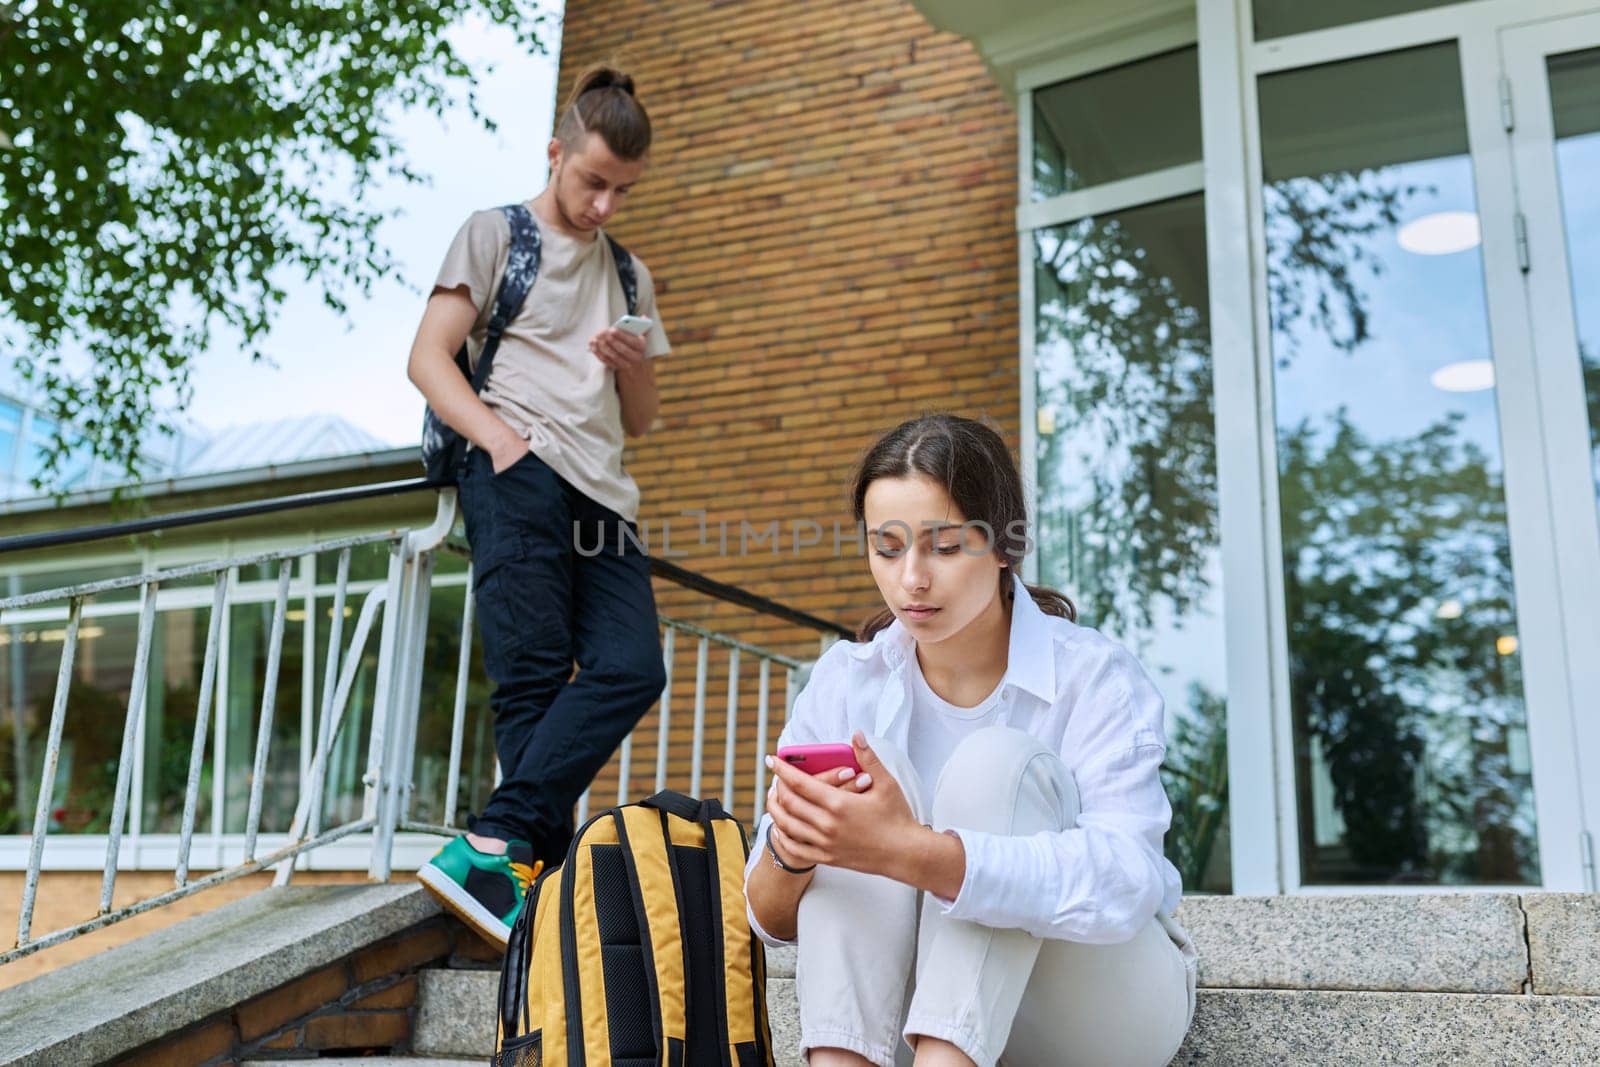 Teenage students with smartphones on the steps of educational building, in focus teenager girl high school age using gadget. Adolescence, youth, education, lifestyle, technology concept